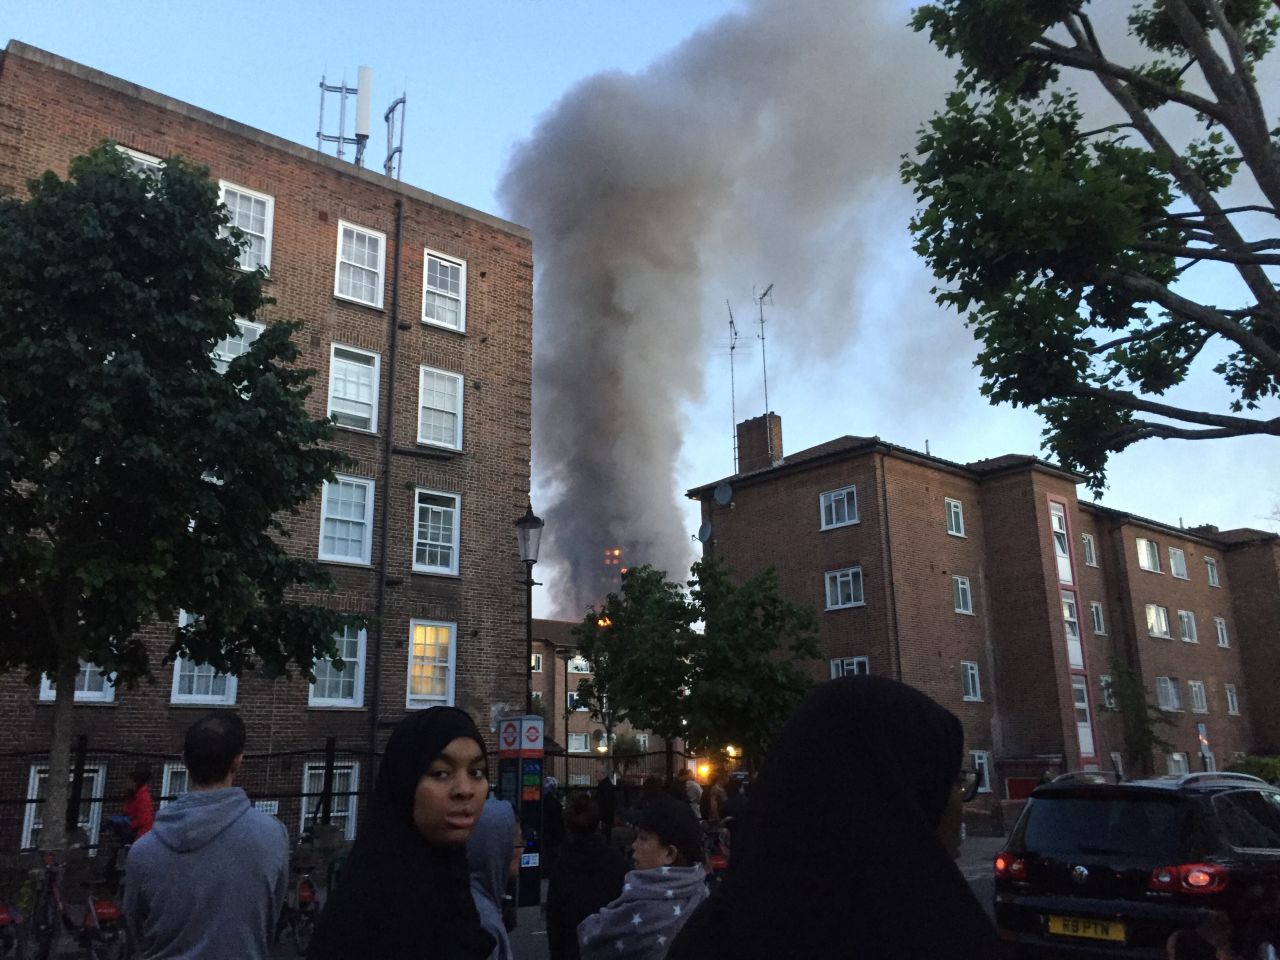 Smoke could be seen billowing over the heads of residents who gathered in nearby streets to watch the blaze.